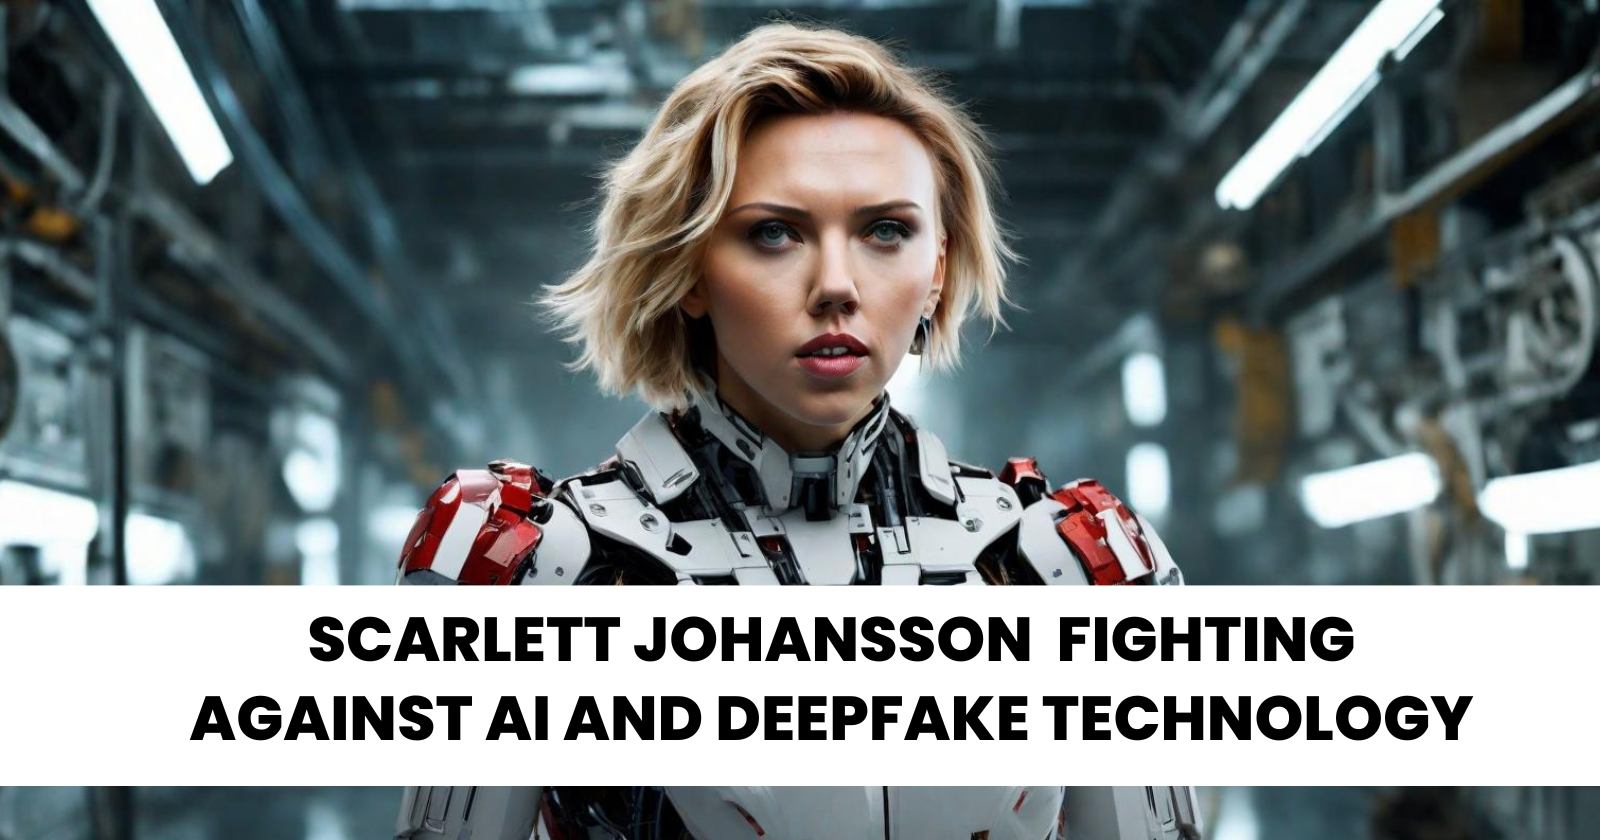 Scarlett Johansson on the challenges of fighting against AI and deepfake technology